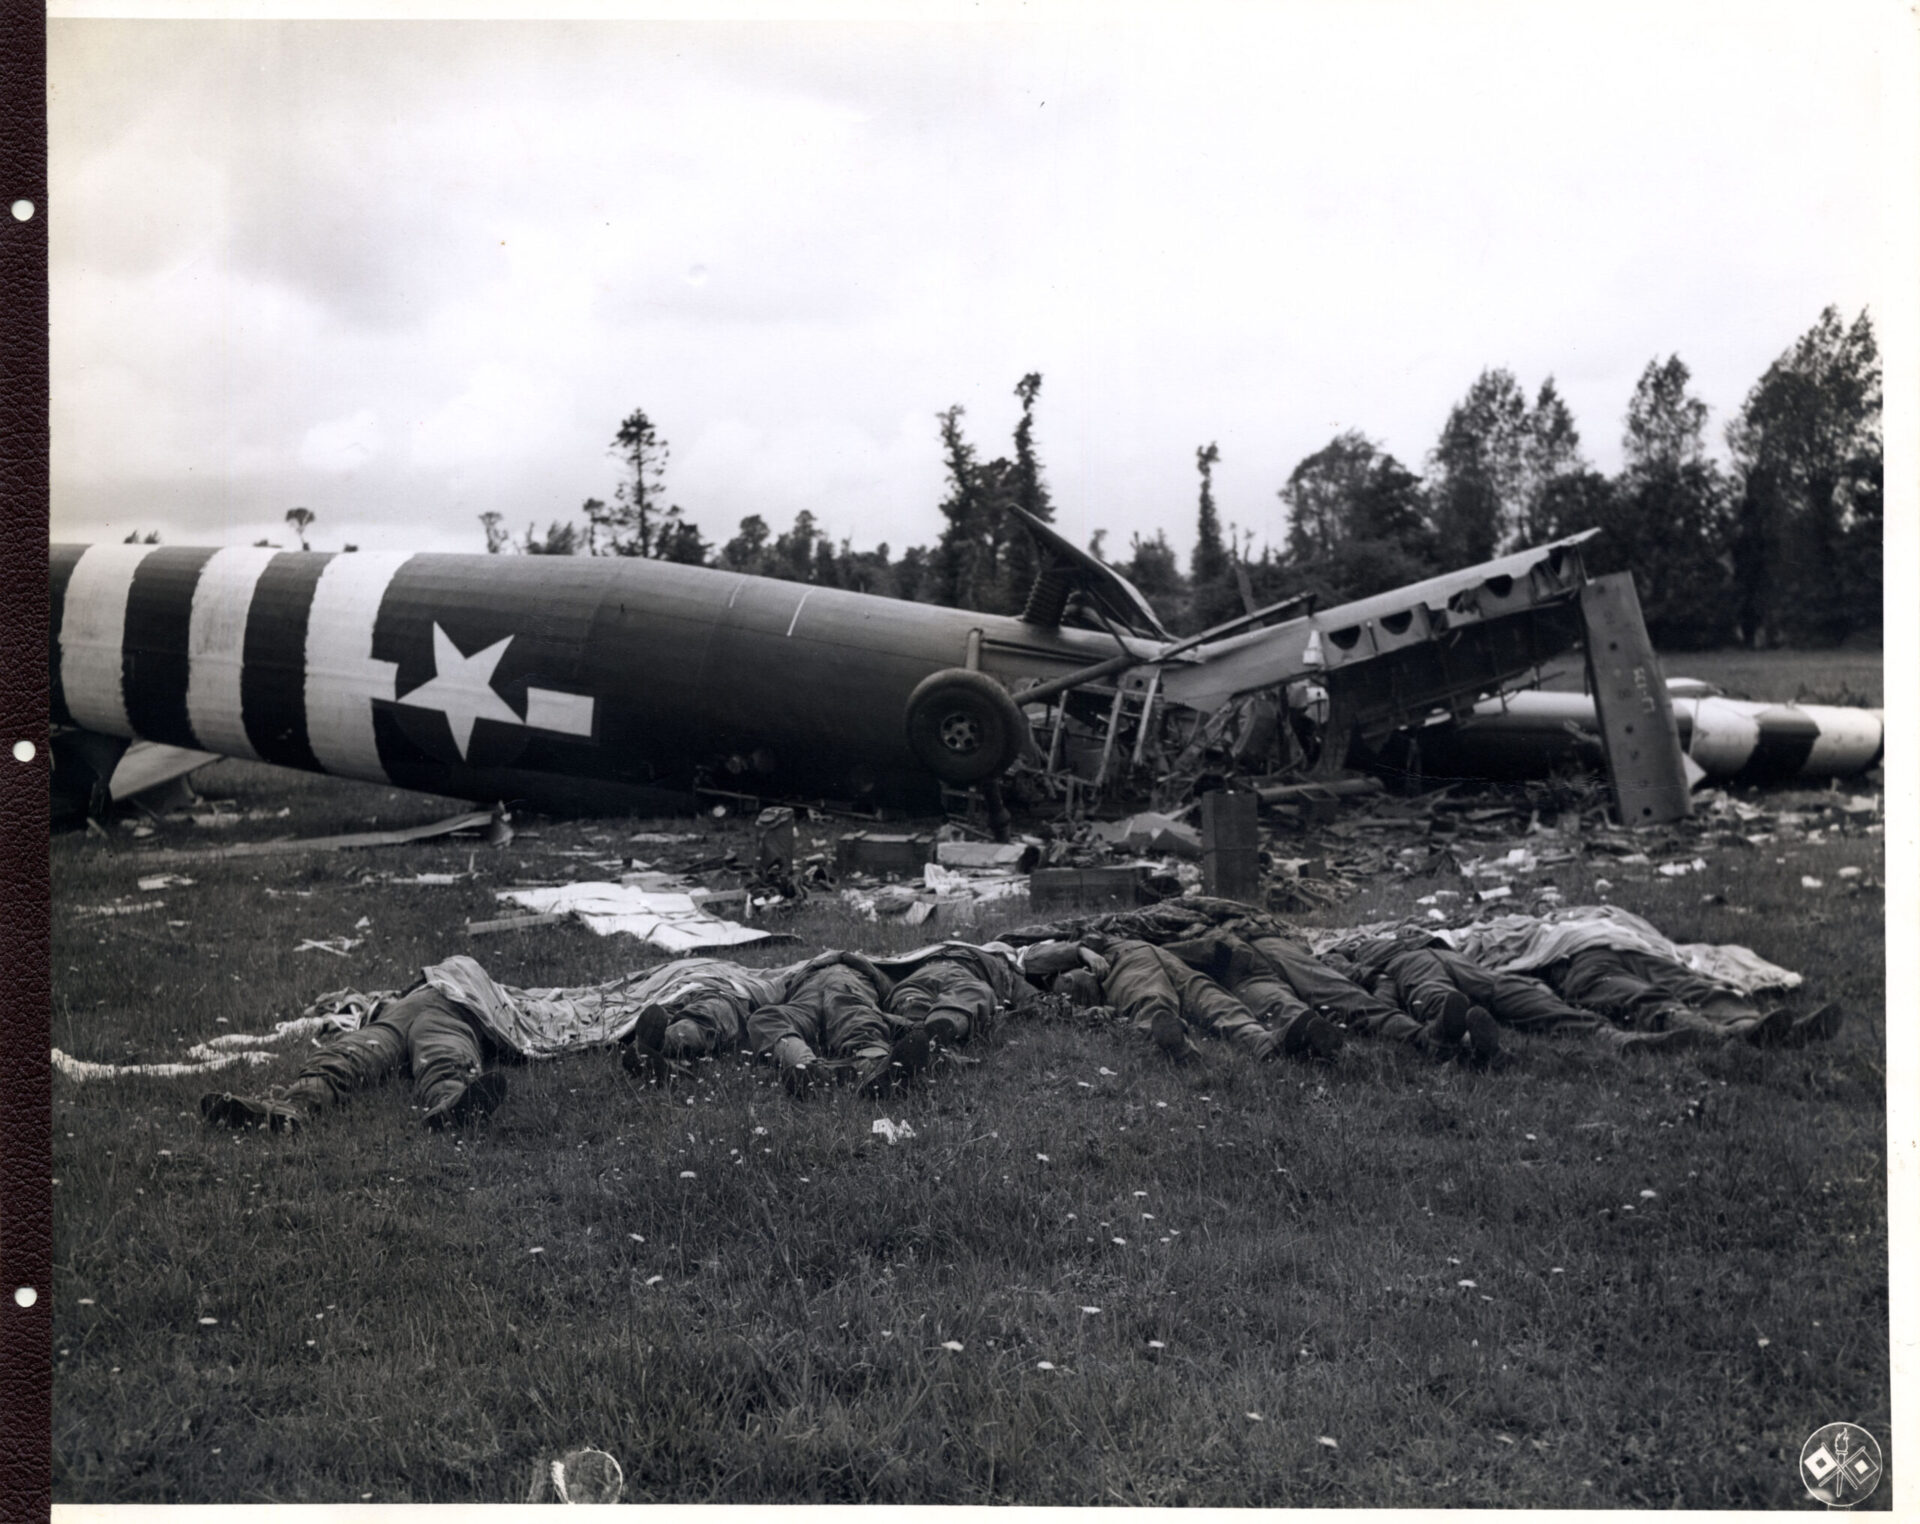 Collapsed plane Infront of dead bodies during world war 2